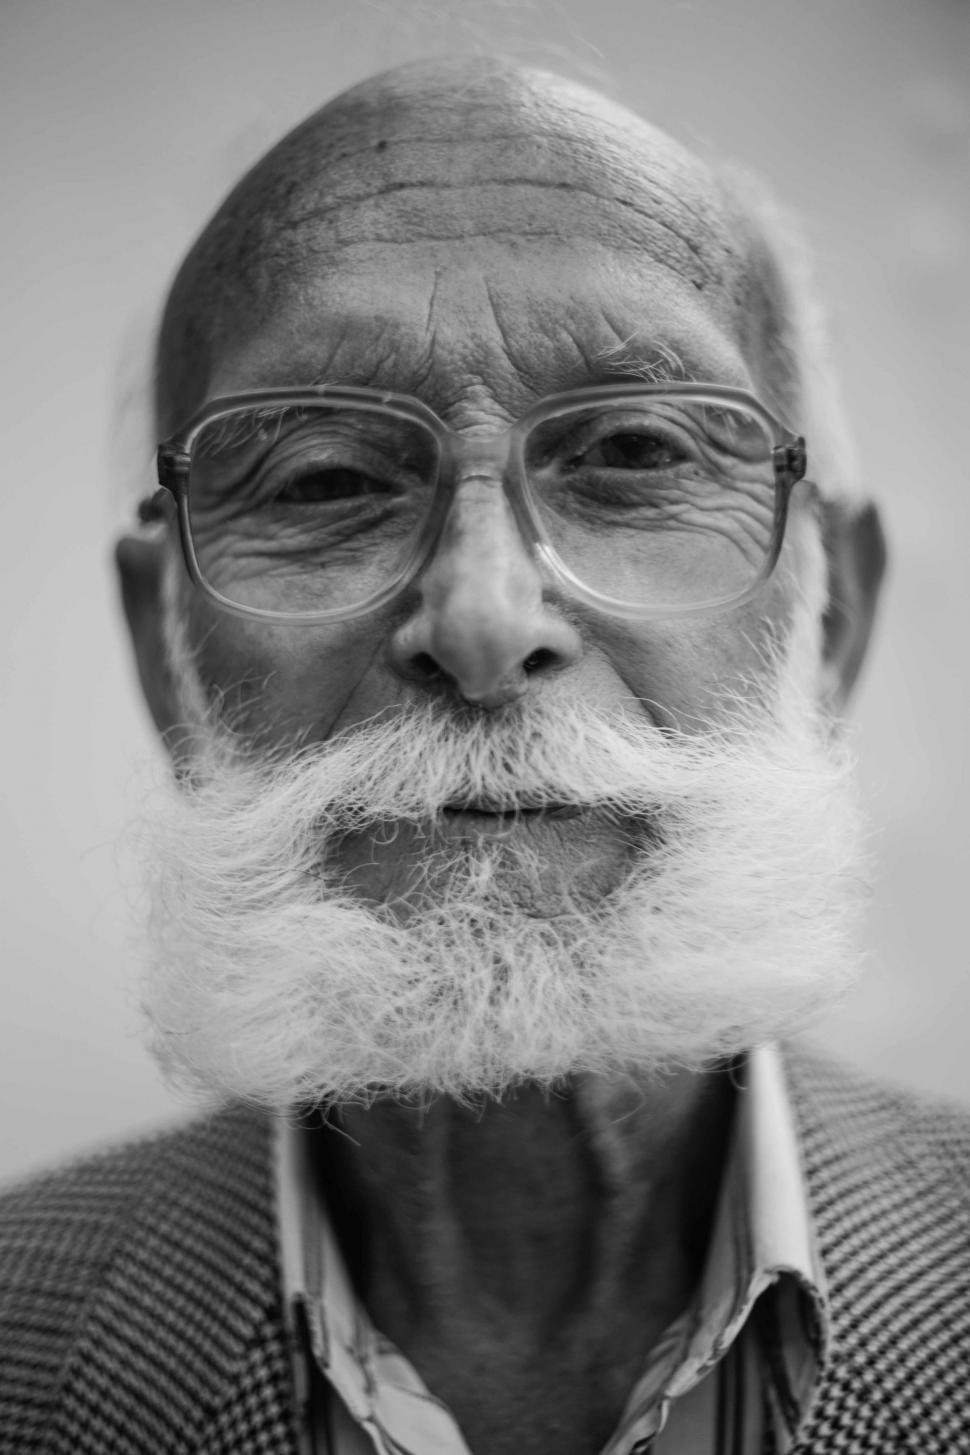 Free Image of Man With White Beard and Glasses 